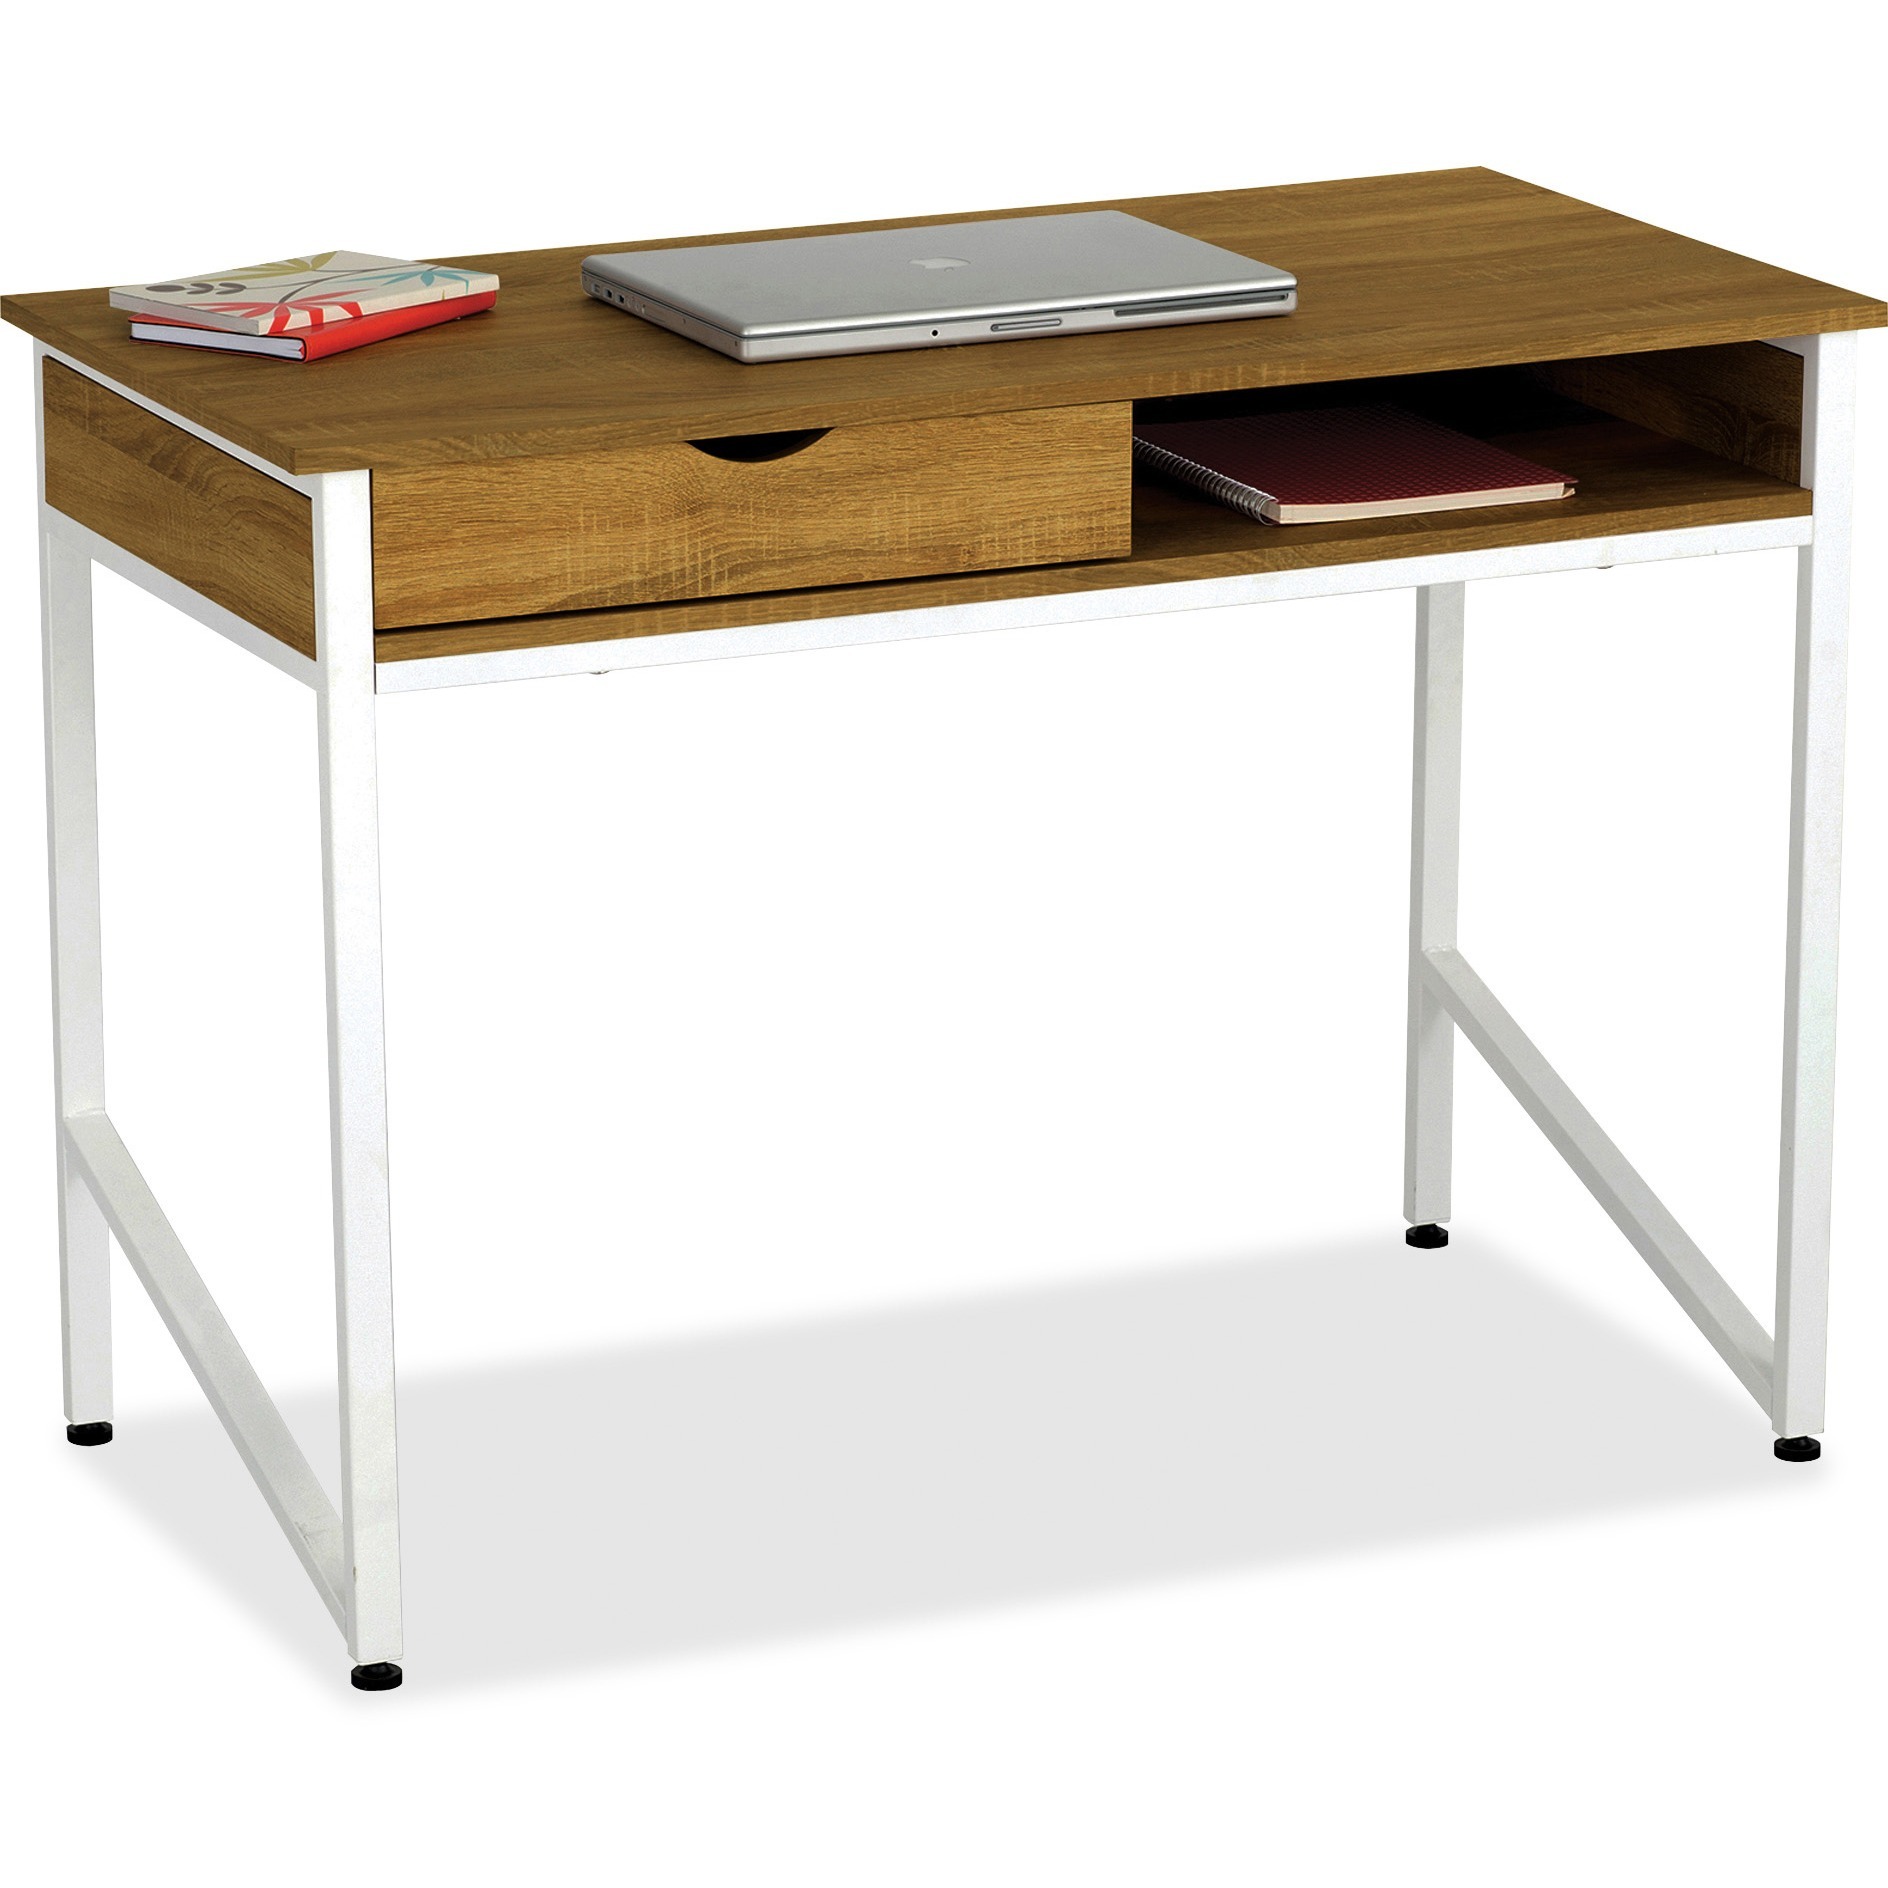 Safco Single Drawer Office Desk - Laminated Rectangle Top - 4 Legs - 43.25" Table Top Width x 21.63" Table Top Depth - 30.75" He